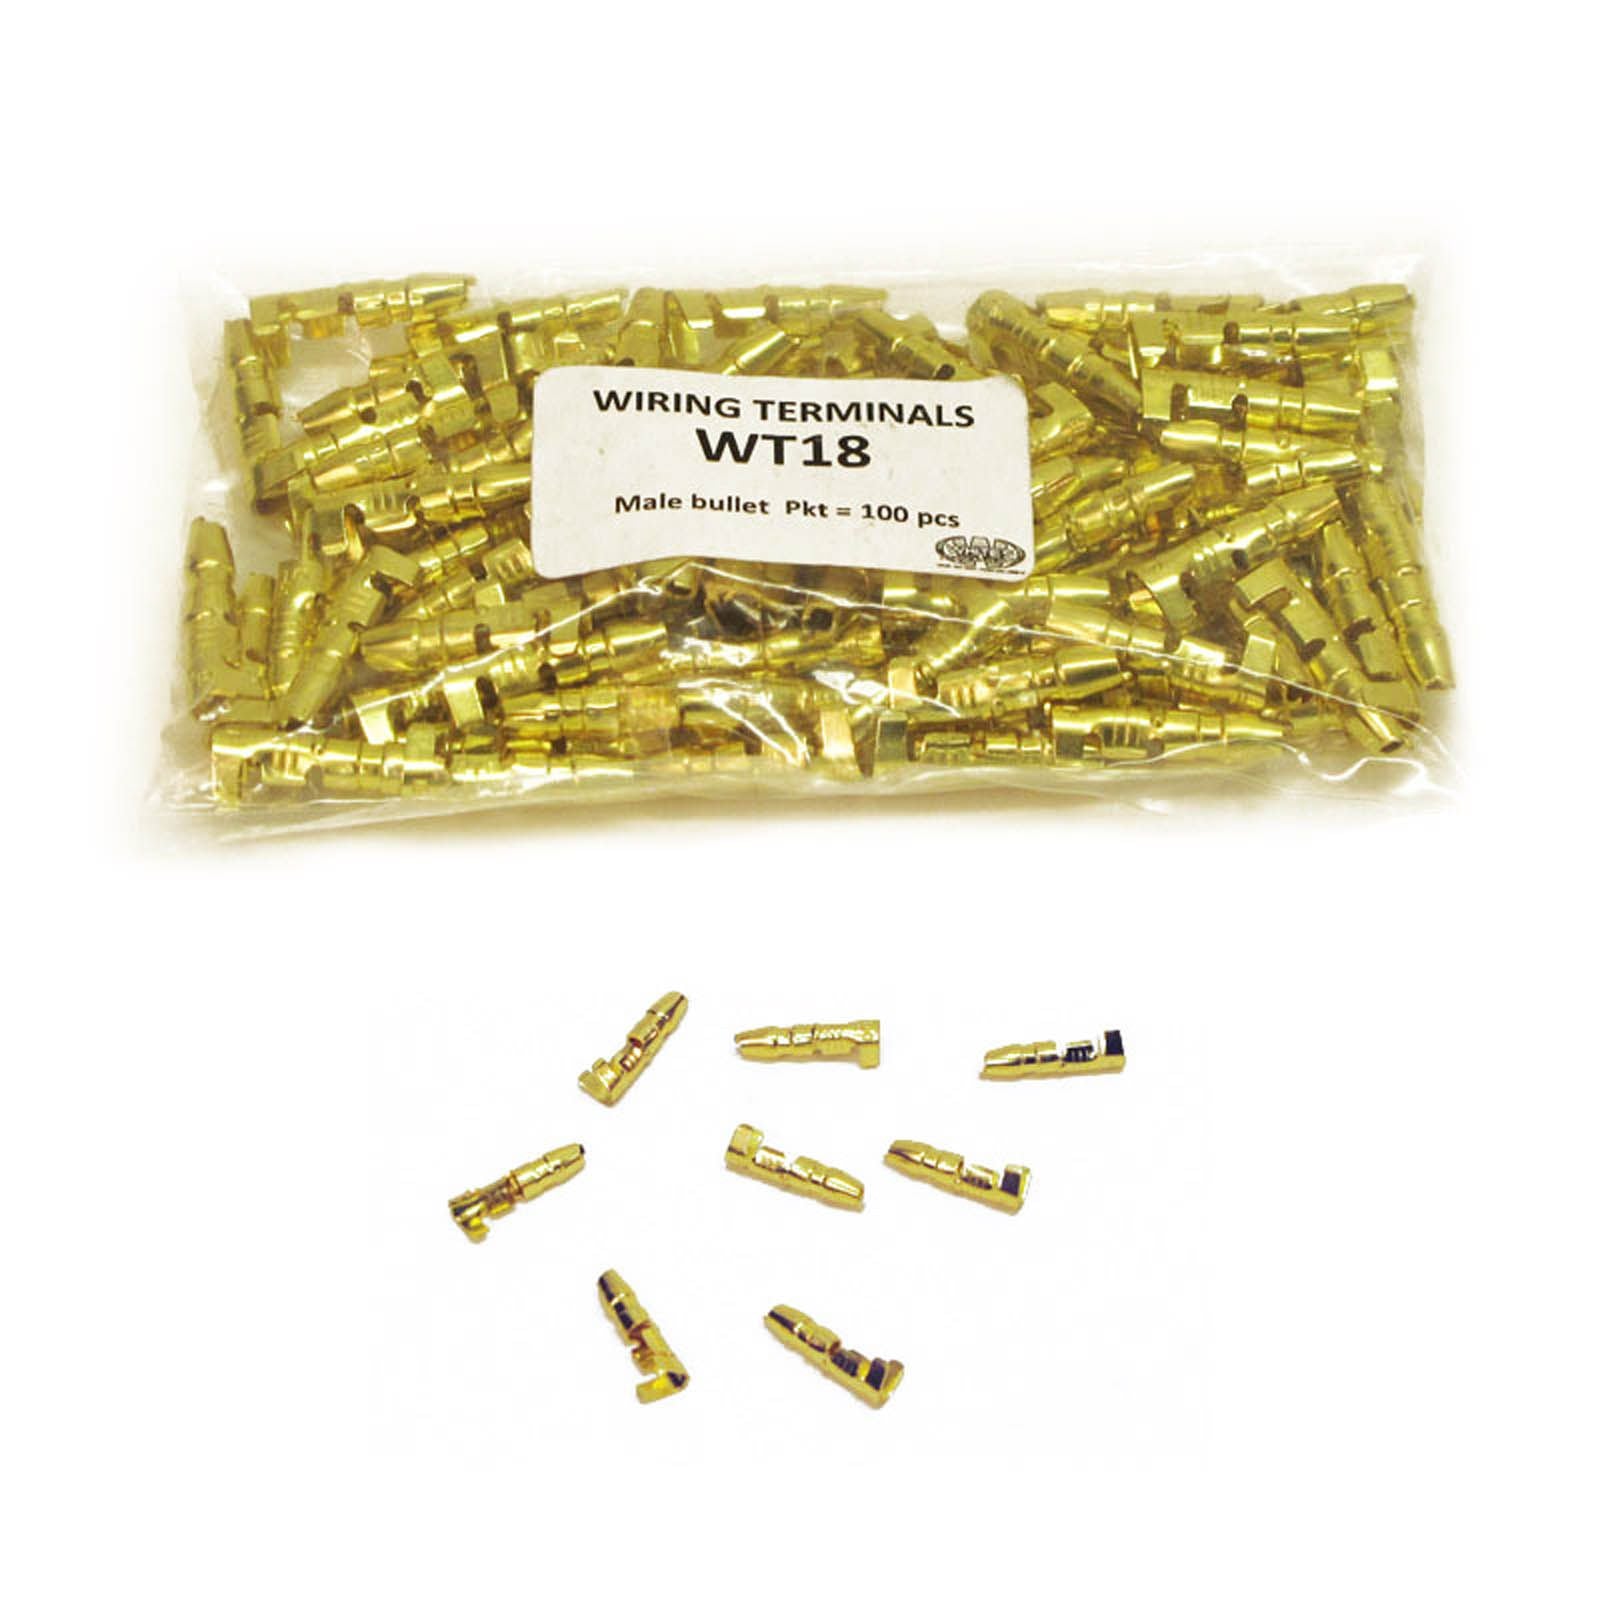 New WHITES Terminal Male Bullet (Packet of 100Pcs) #WT18